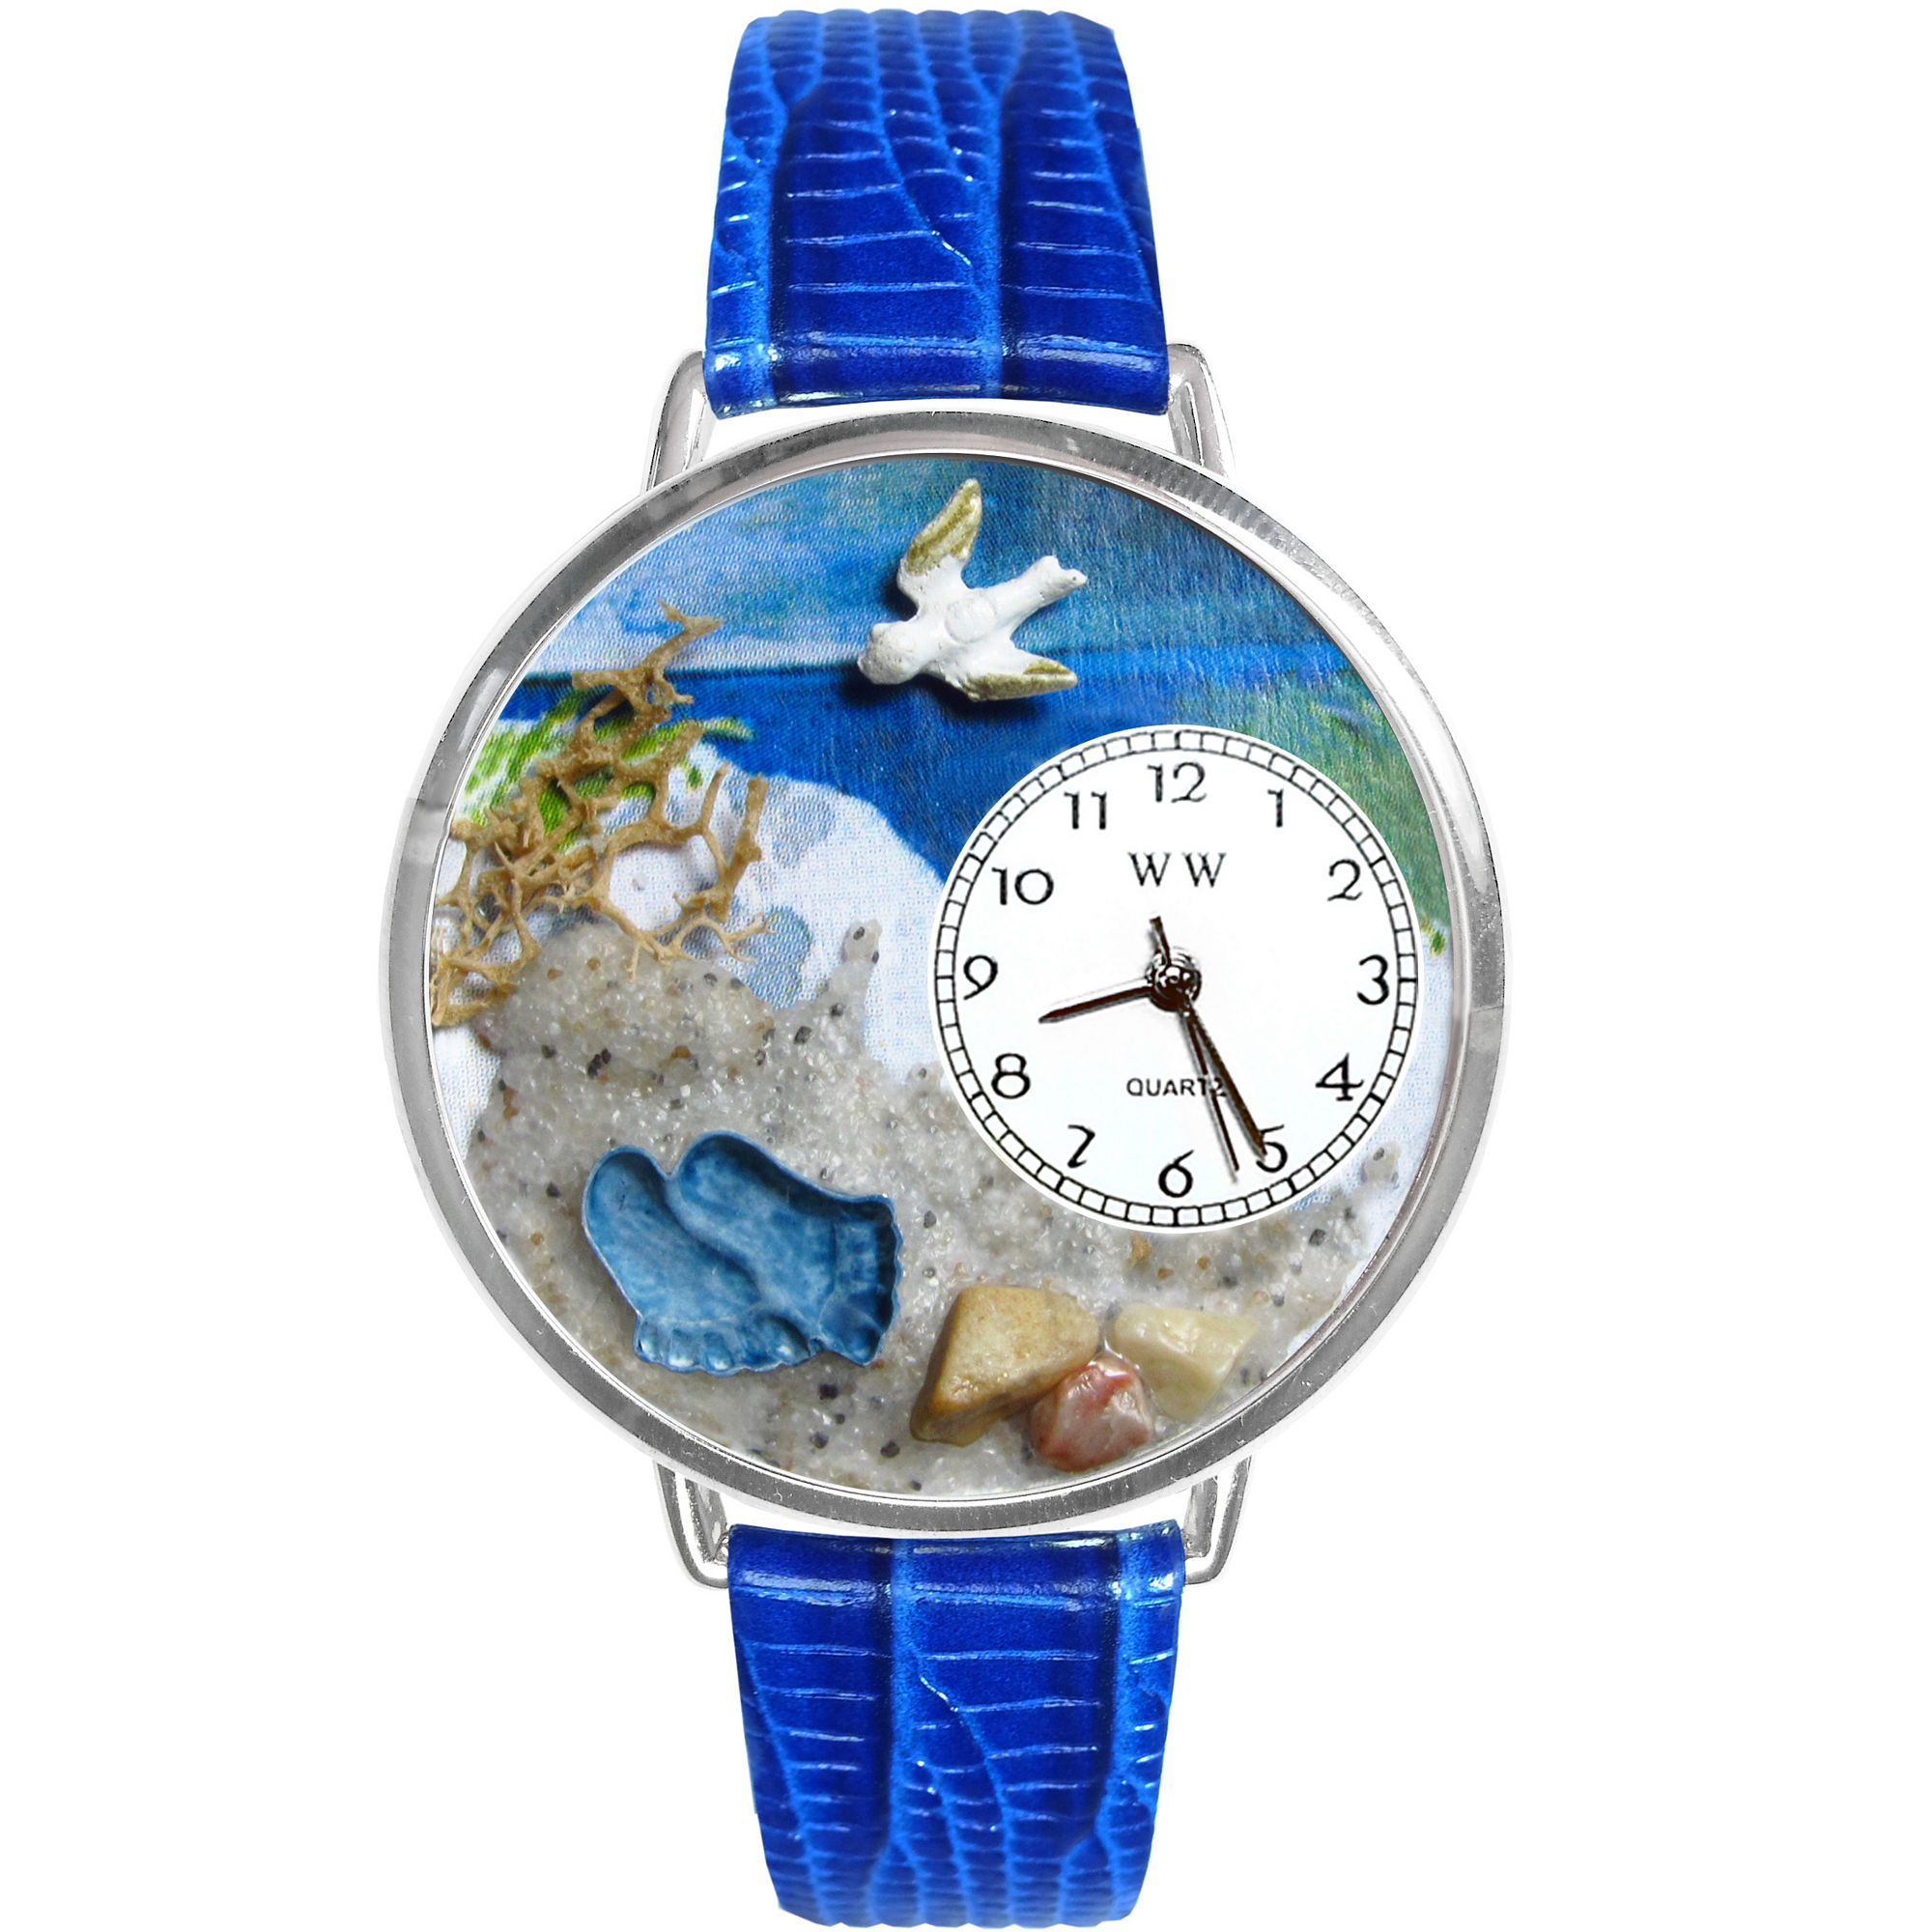 Whimsical Watches Personalized Footprints Womens Silver-Tone Bezel Blue Leather Strap Watch